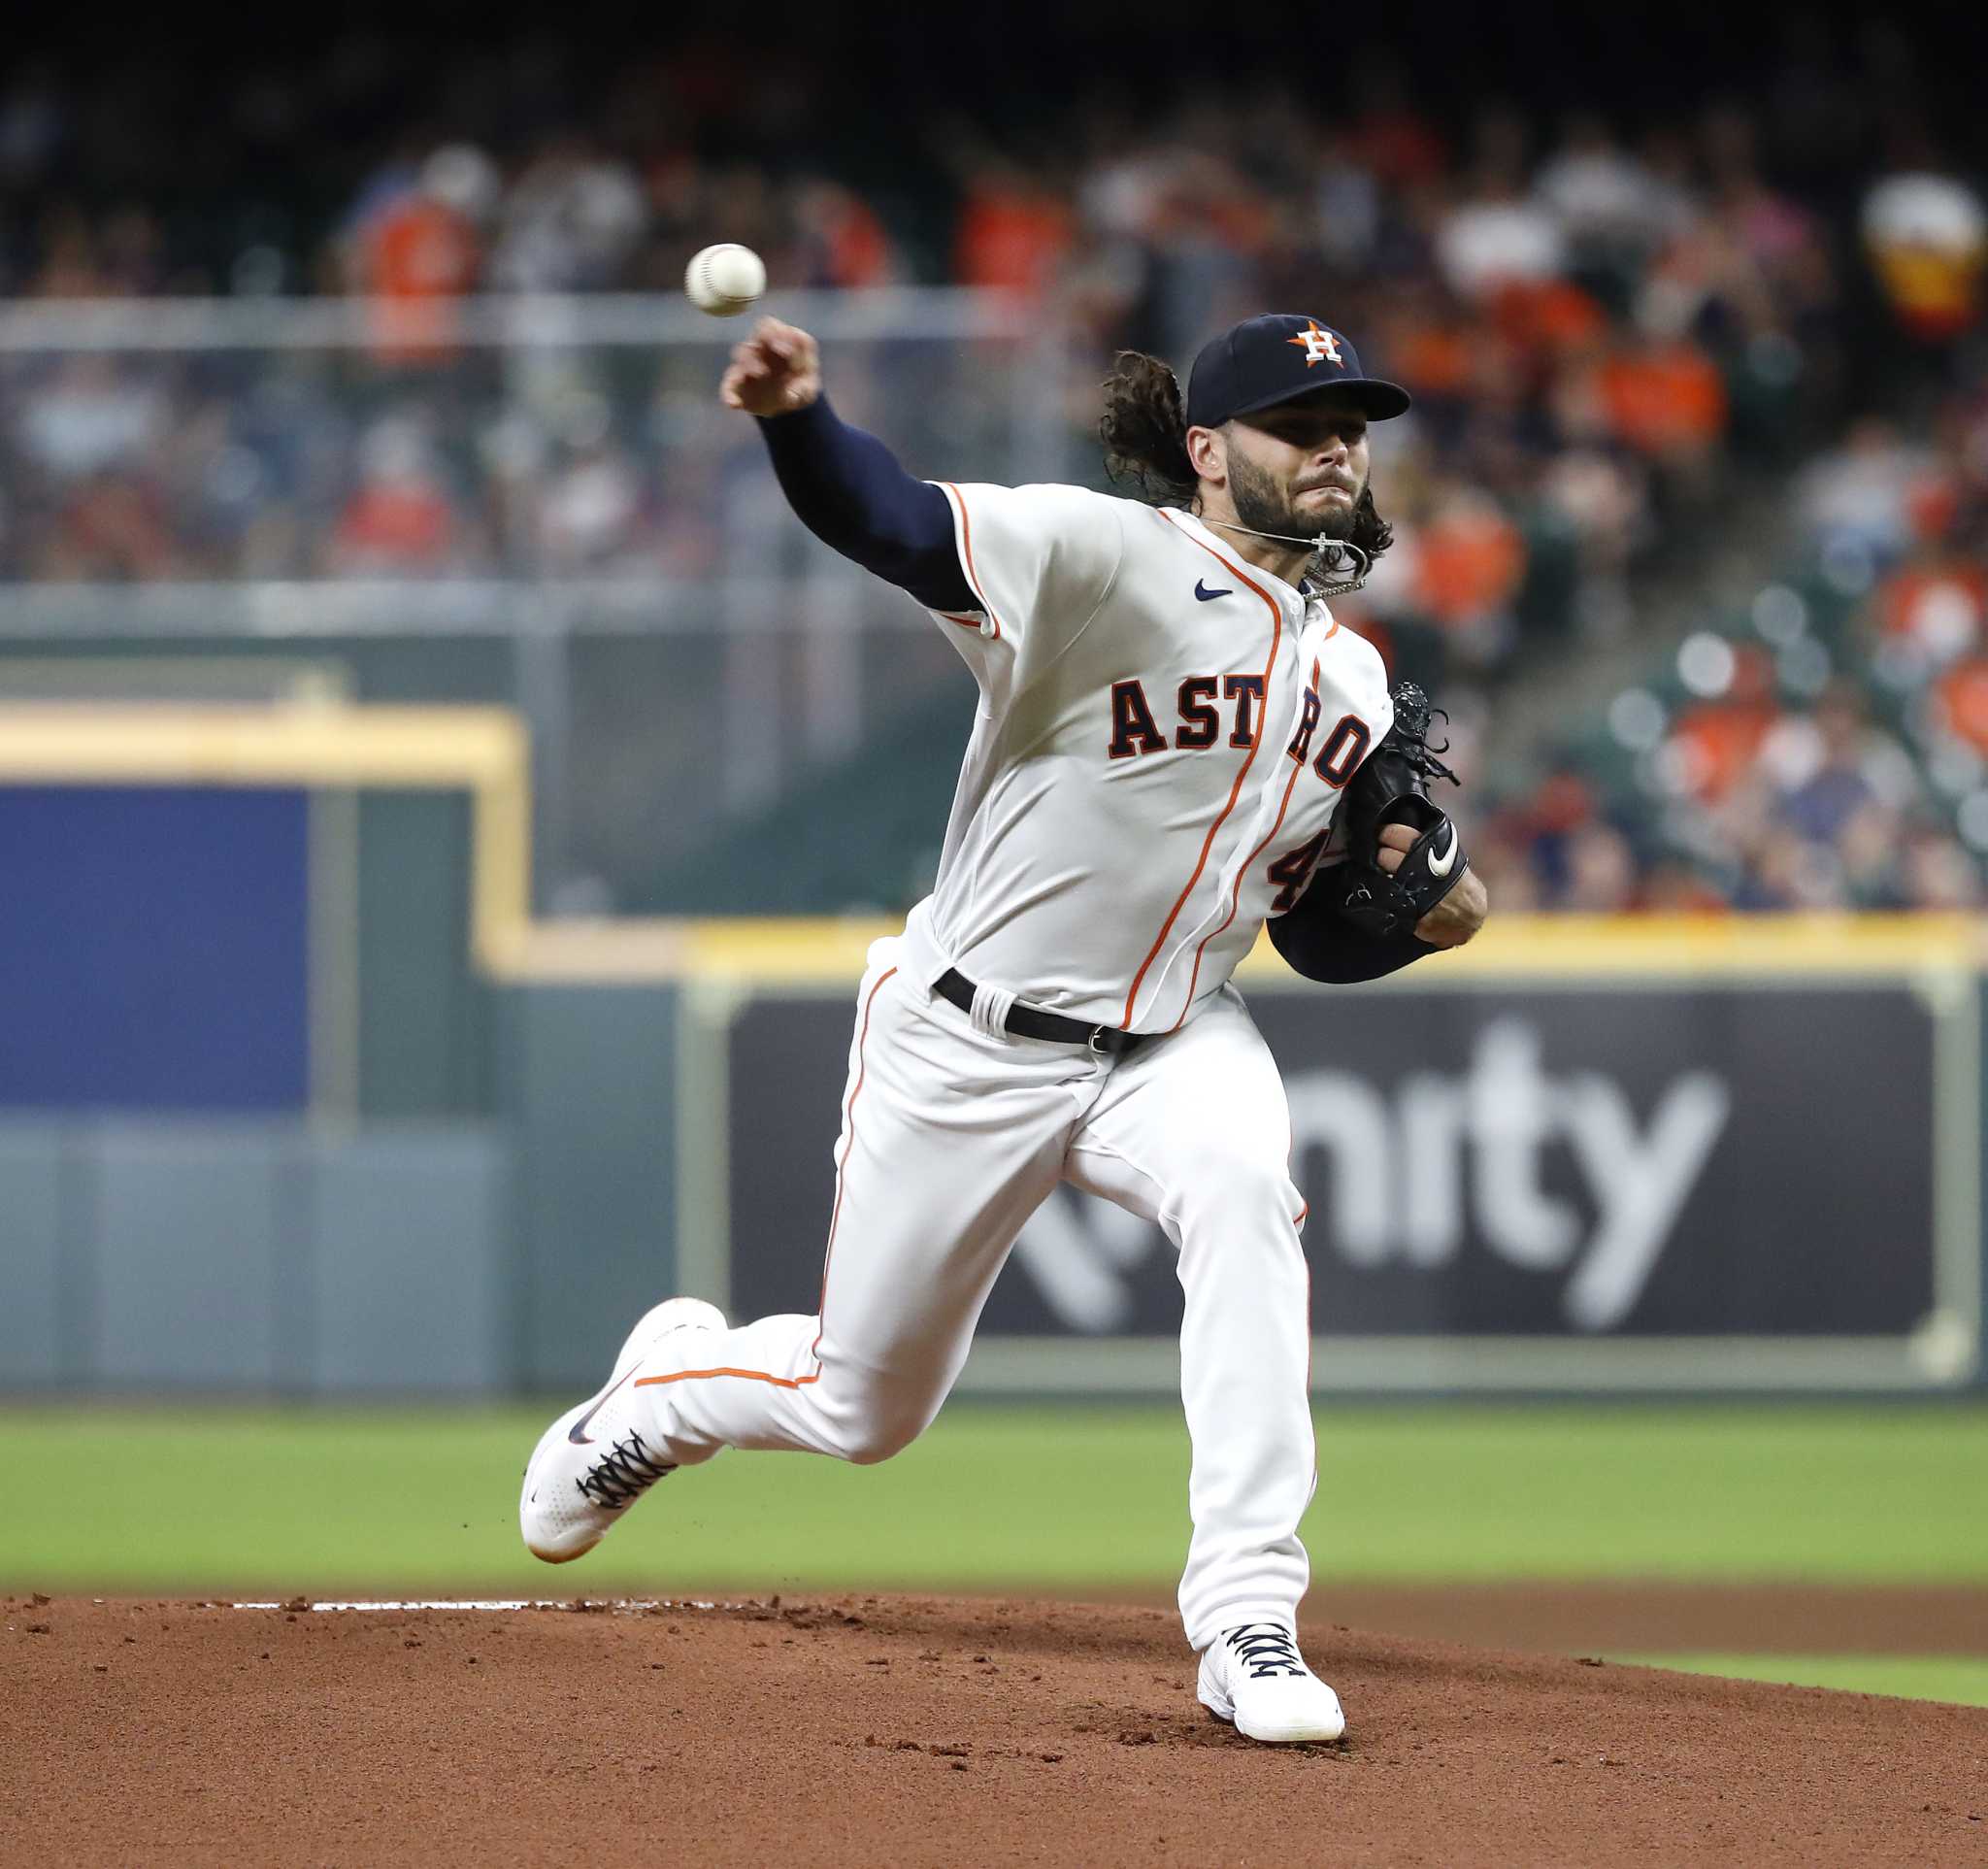 Grading on a curve? Lance McCullers Jr. doesn't need it